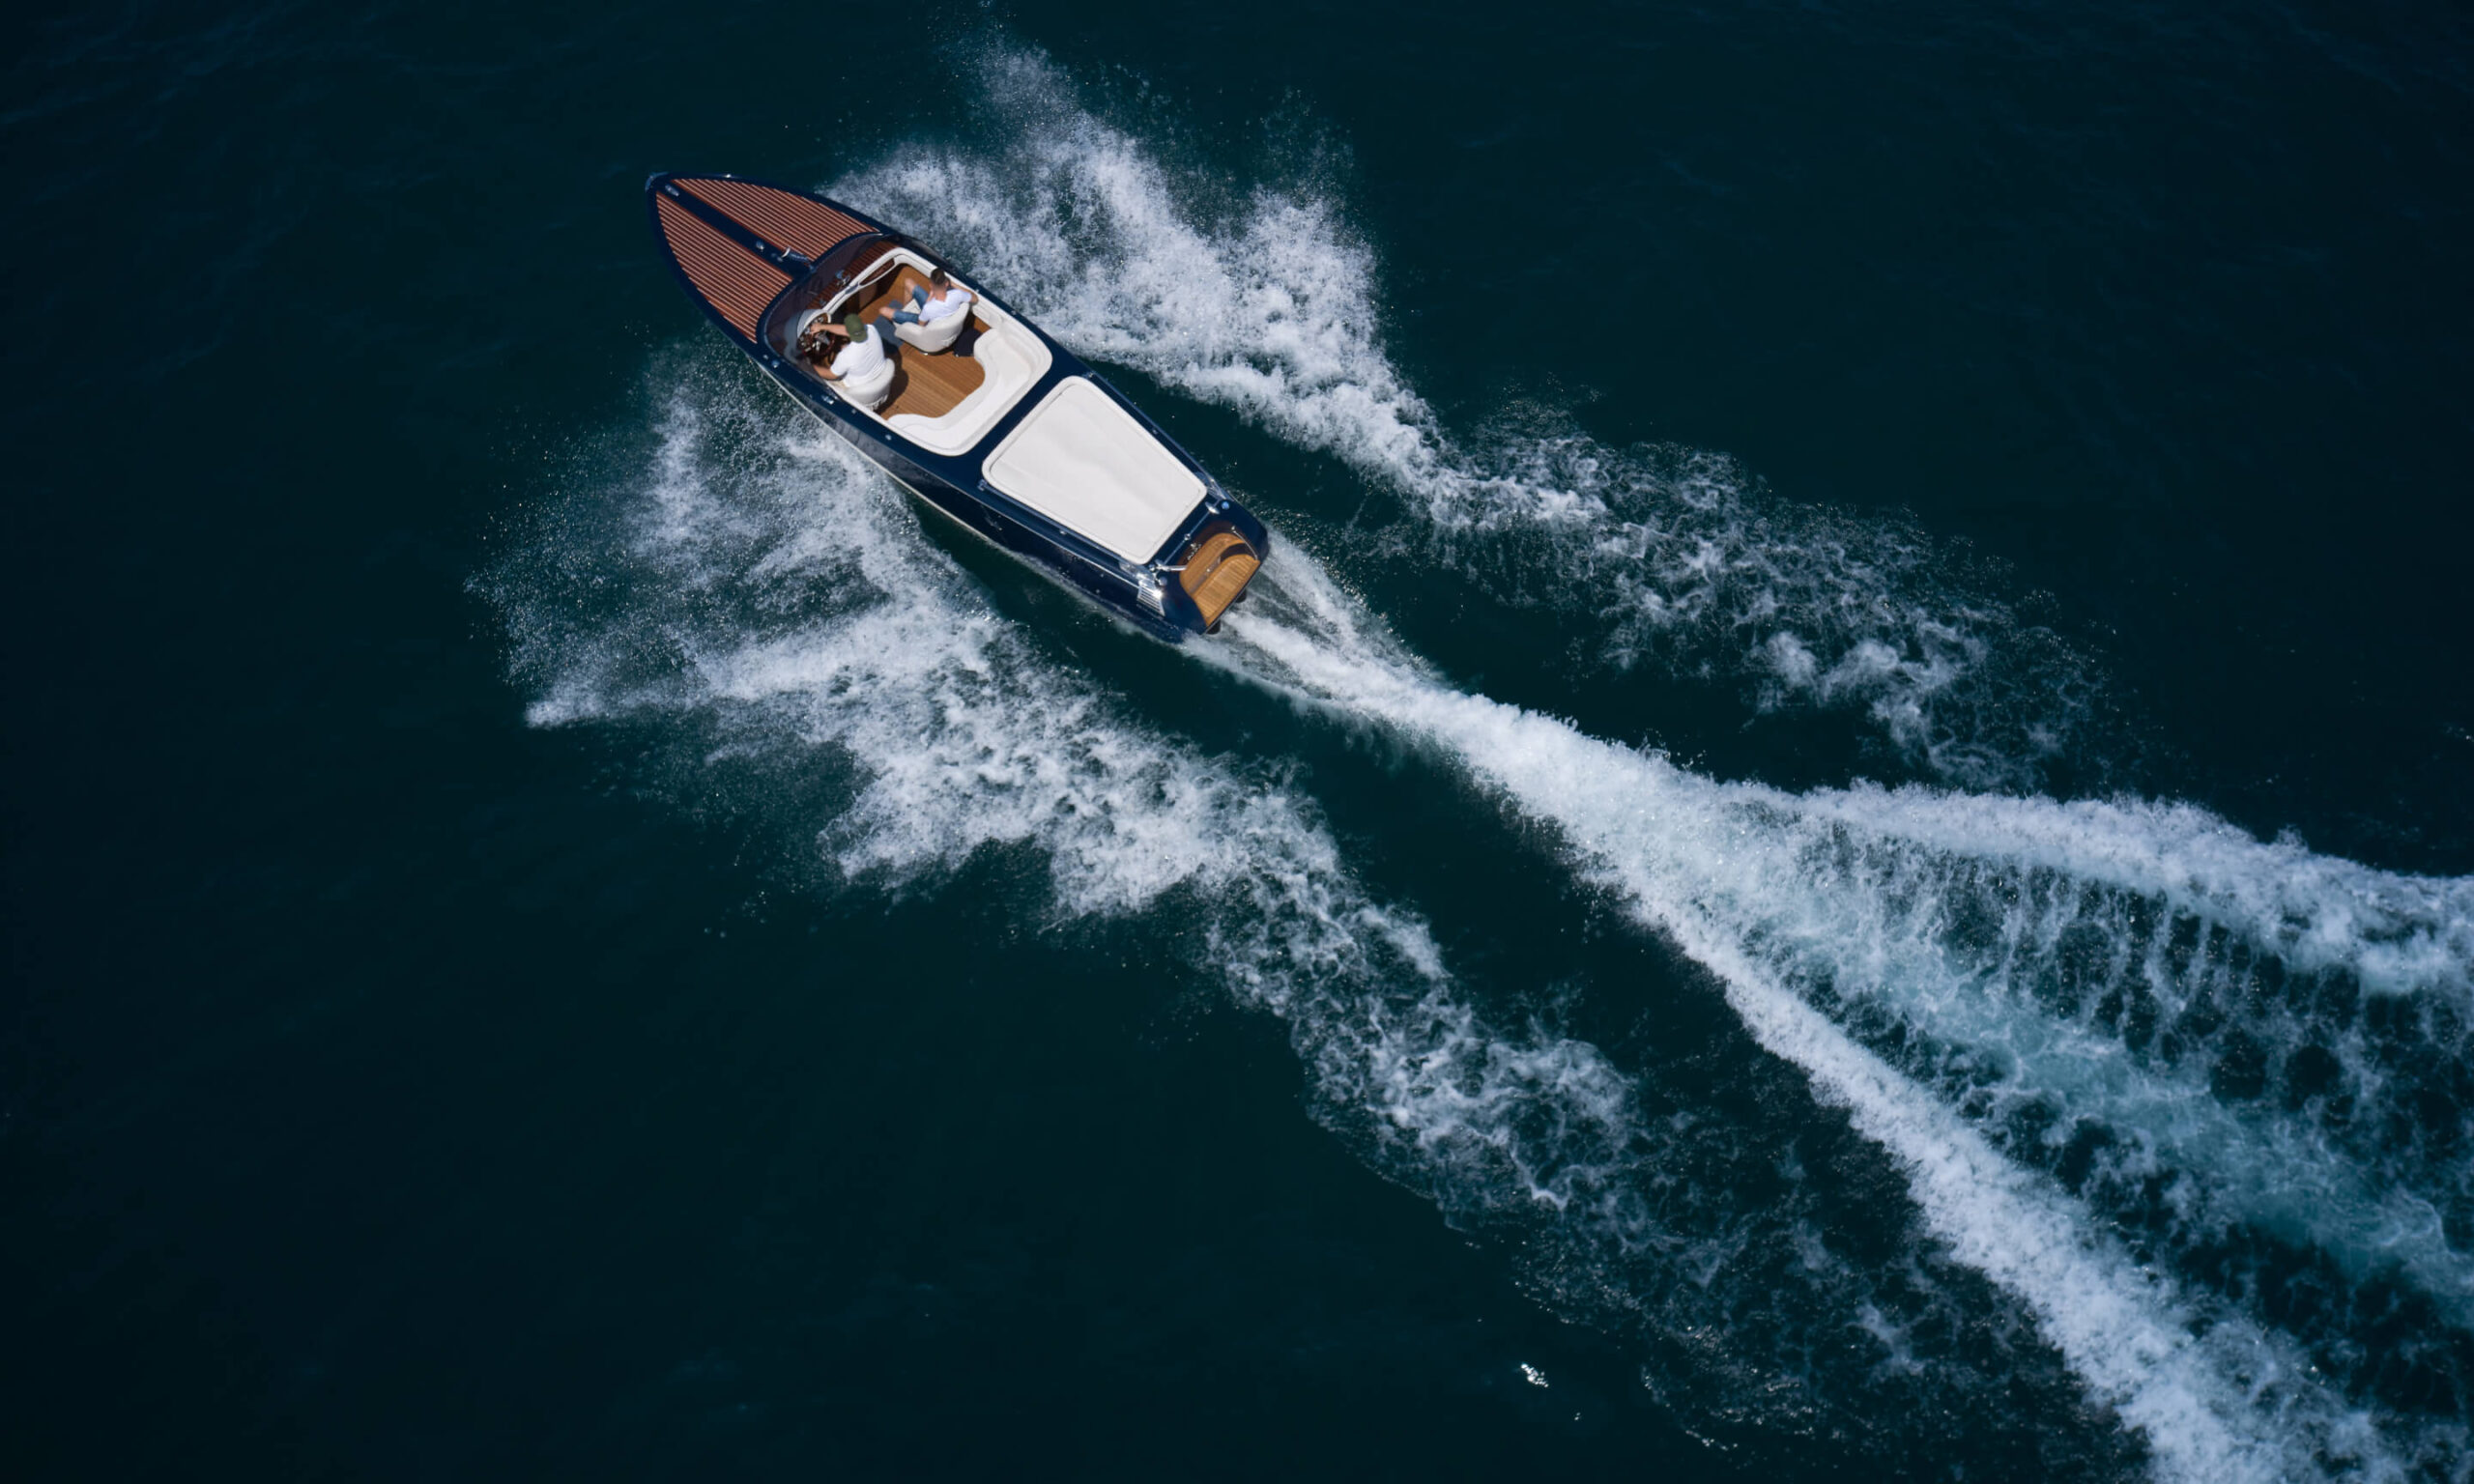 bird eye view of two people riding a luxury wooden runabout yacht in the ocean